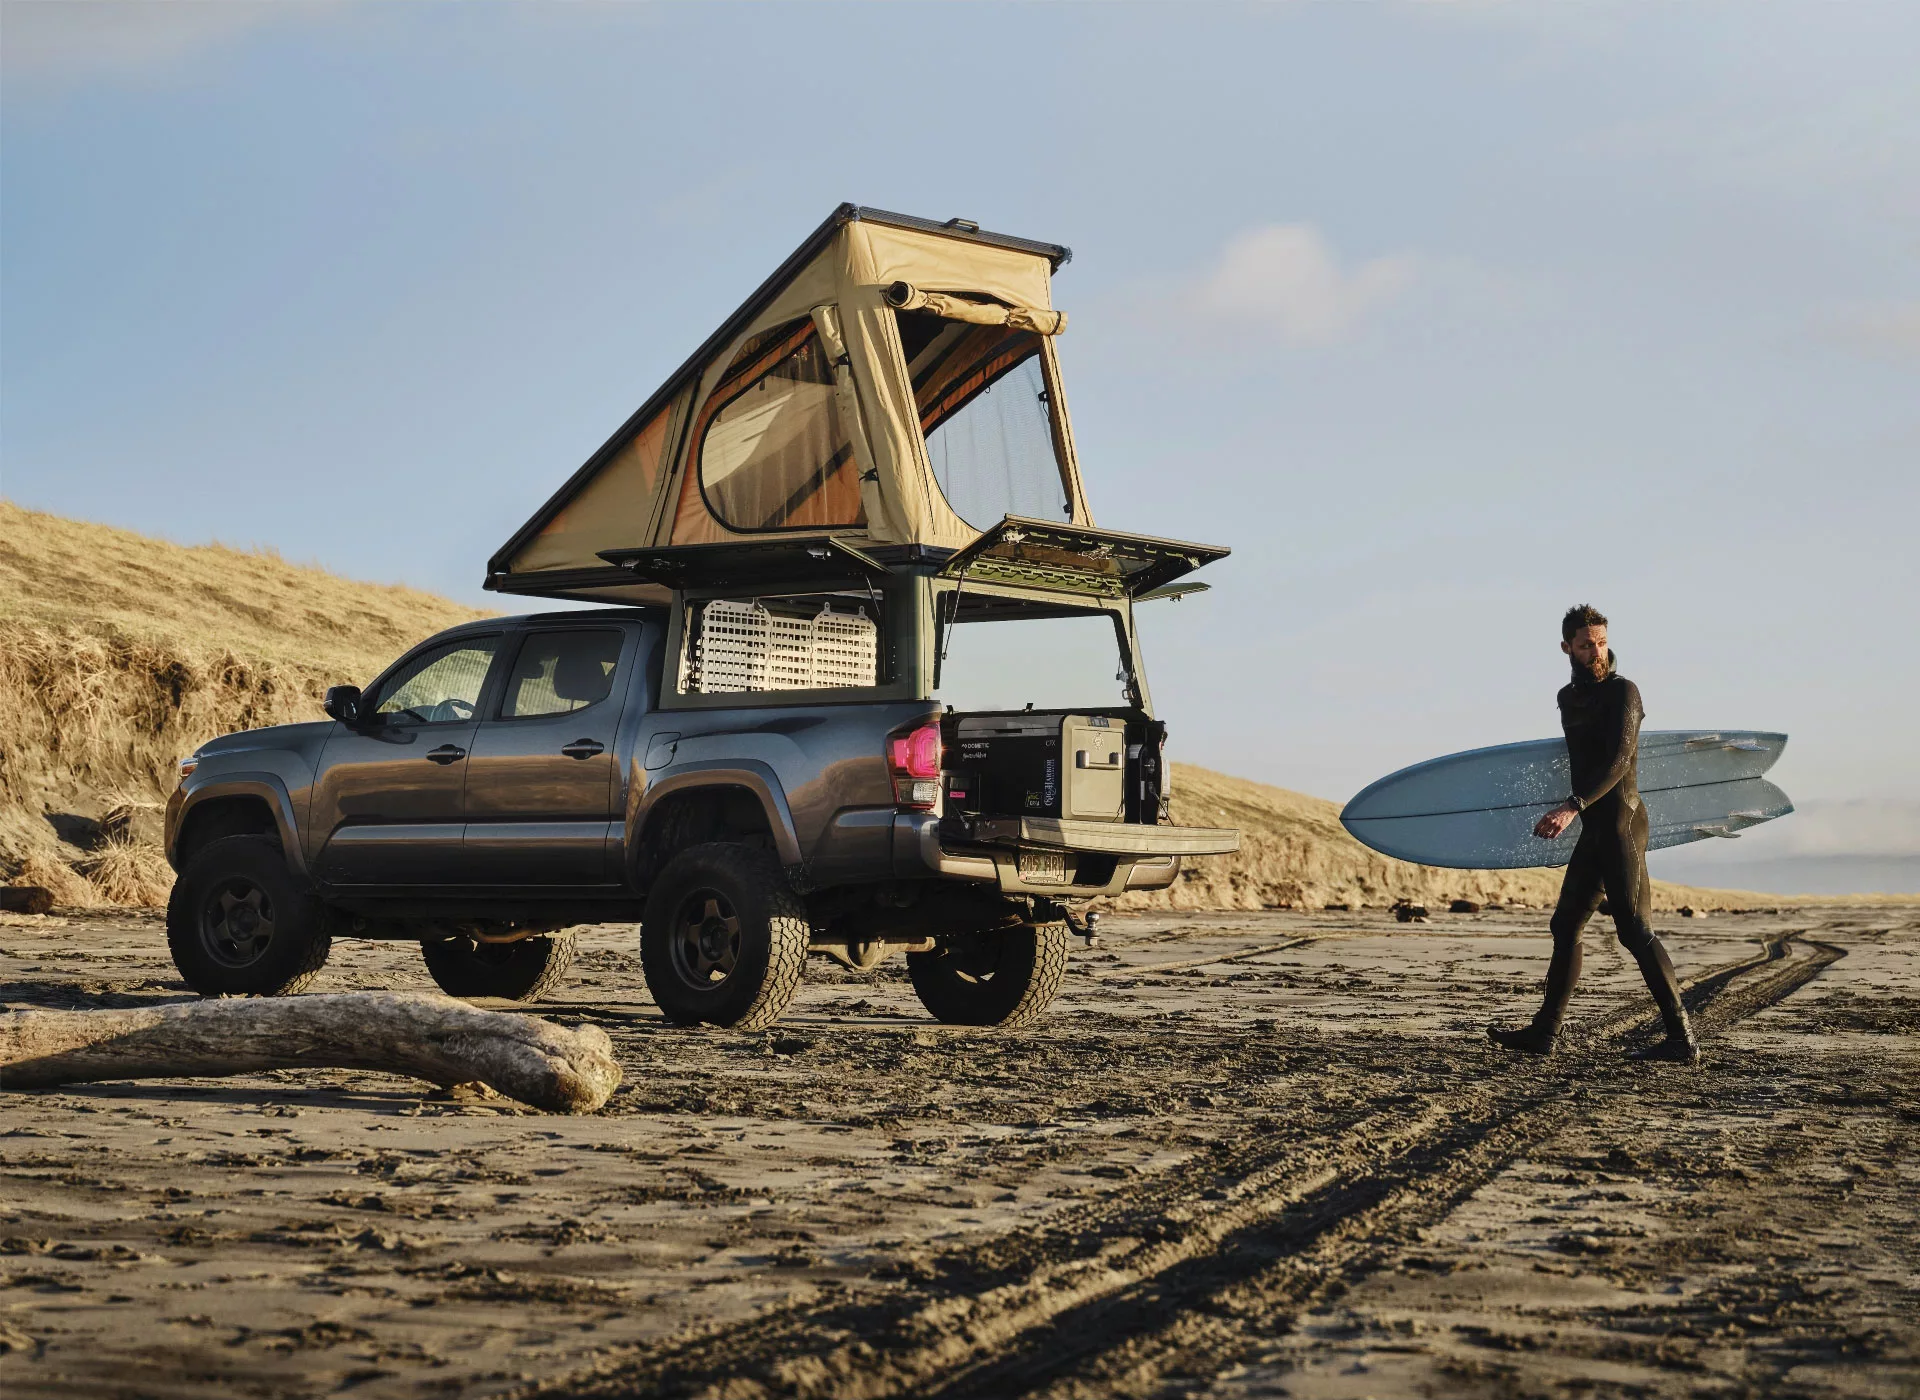 Toyota Tacoma with X1 truck camper on a beach in the Pacific Northwest.